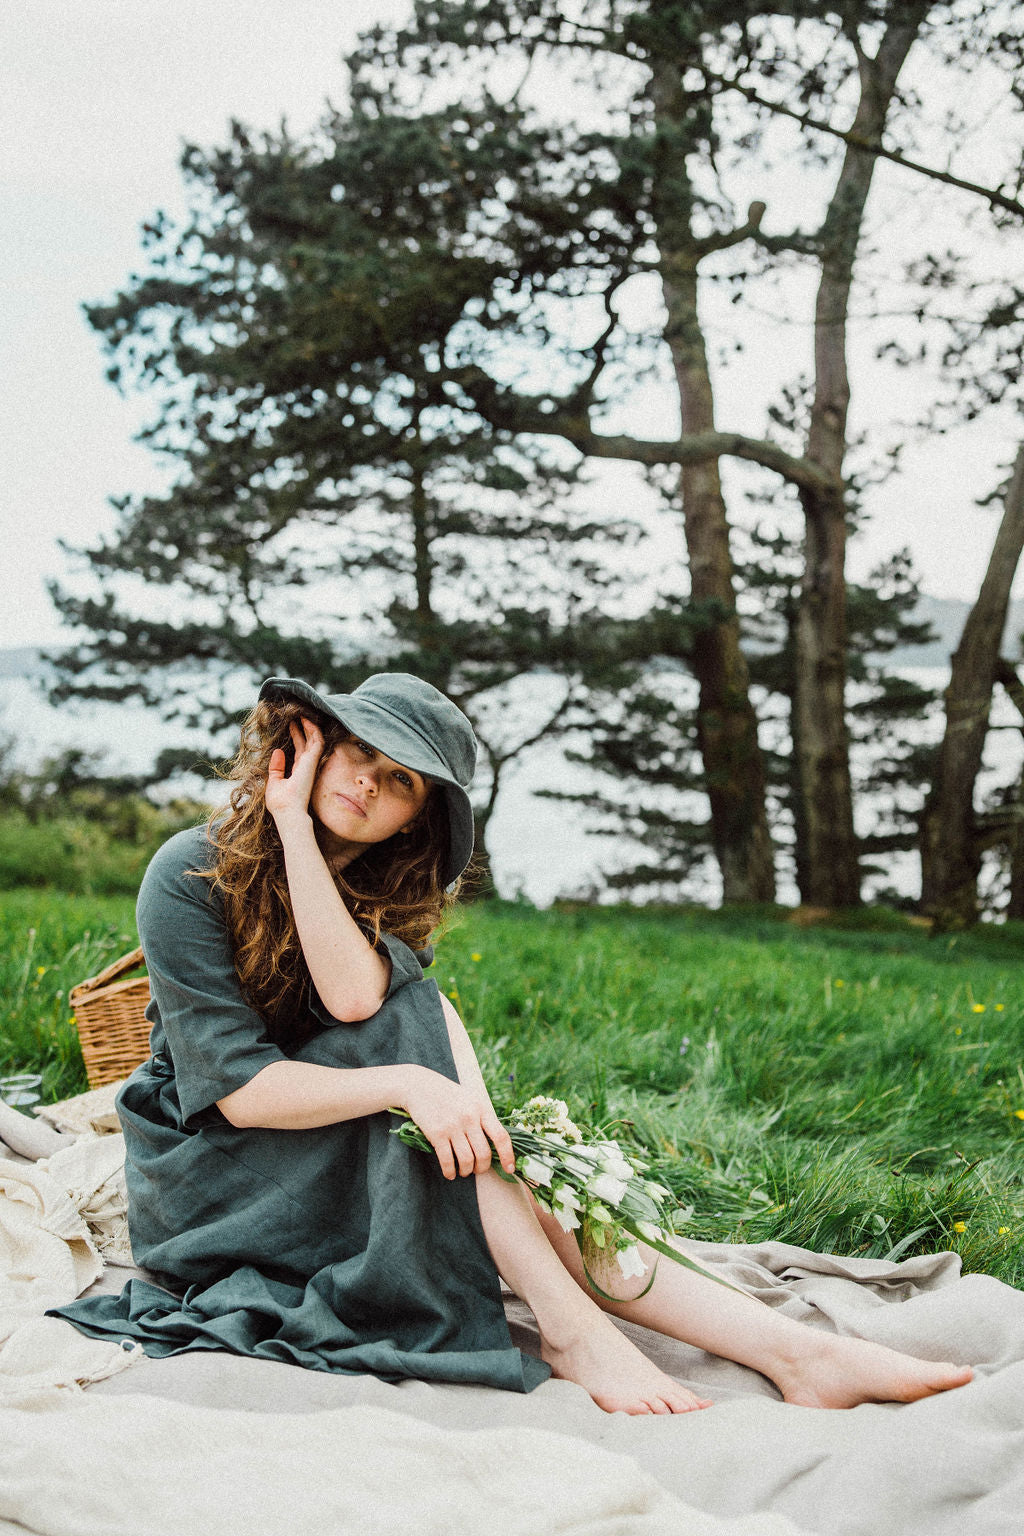 Solpardus Cornish coastal picnic in wild field with flowers. Nyx linen hat and Delphi linen dress. All natural ethical sustainable sunwear swimwear linen clothing perfect for sensitive skin psoriasis and eczema